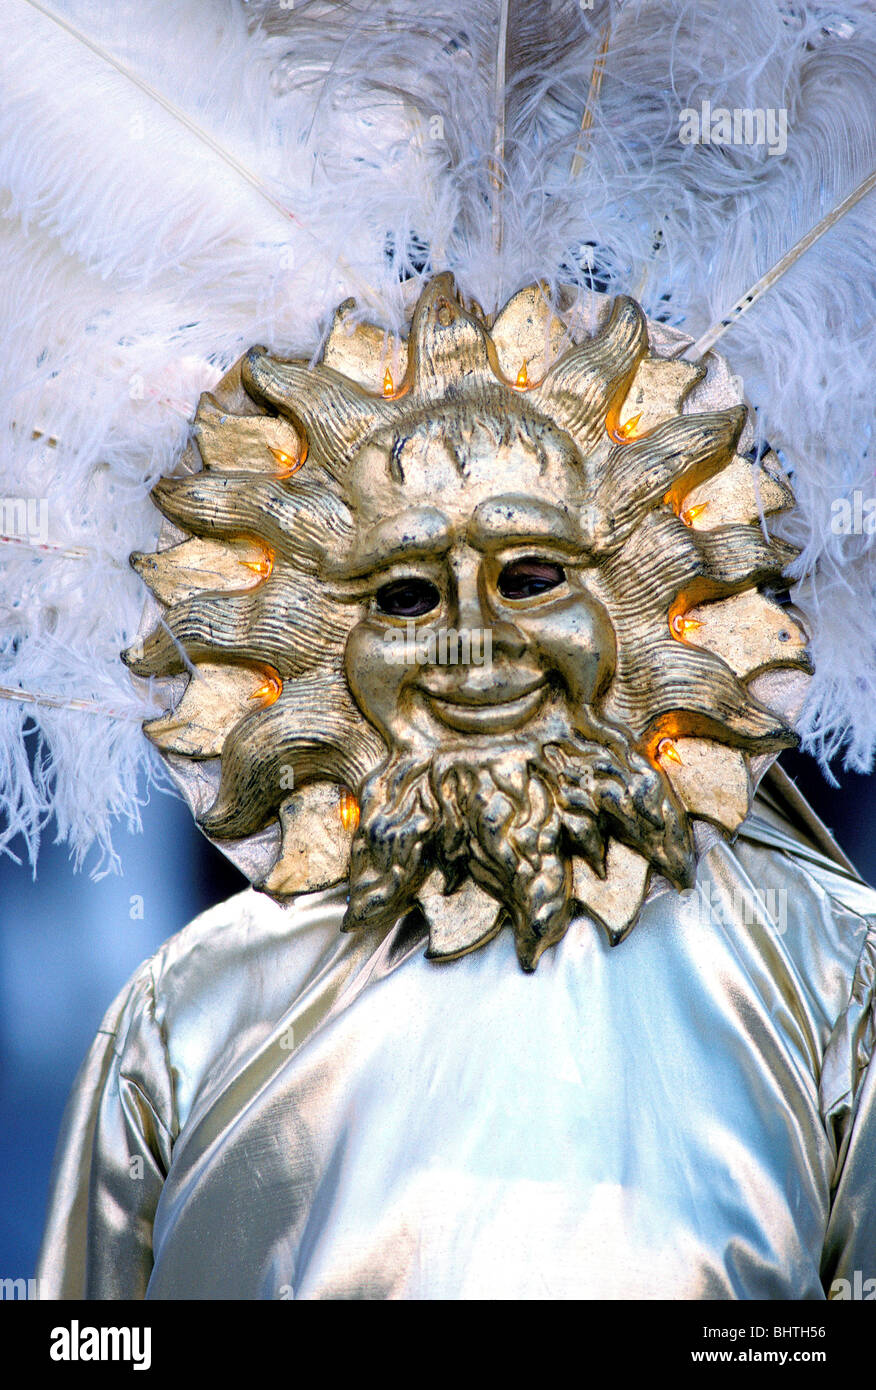 https://c8.alamy.com/comp/BHTH56/person-wearing-a-traditional-masquerade-sun-mask-at-venice-carnival-BHTH56.jpg